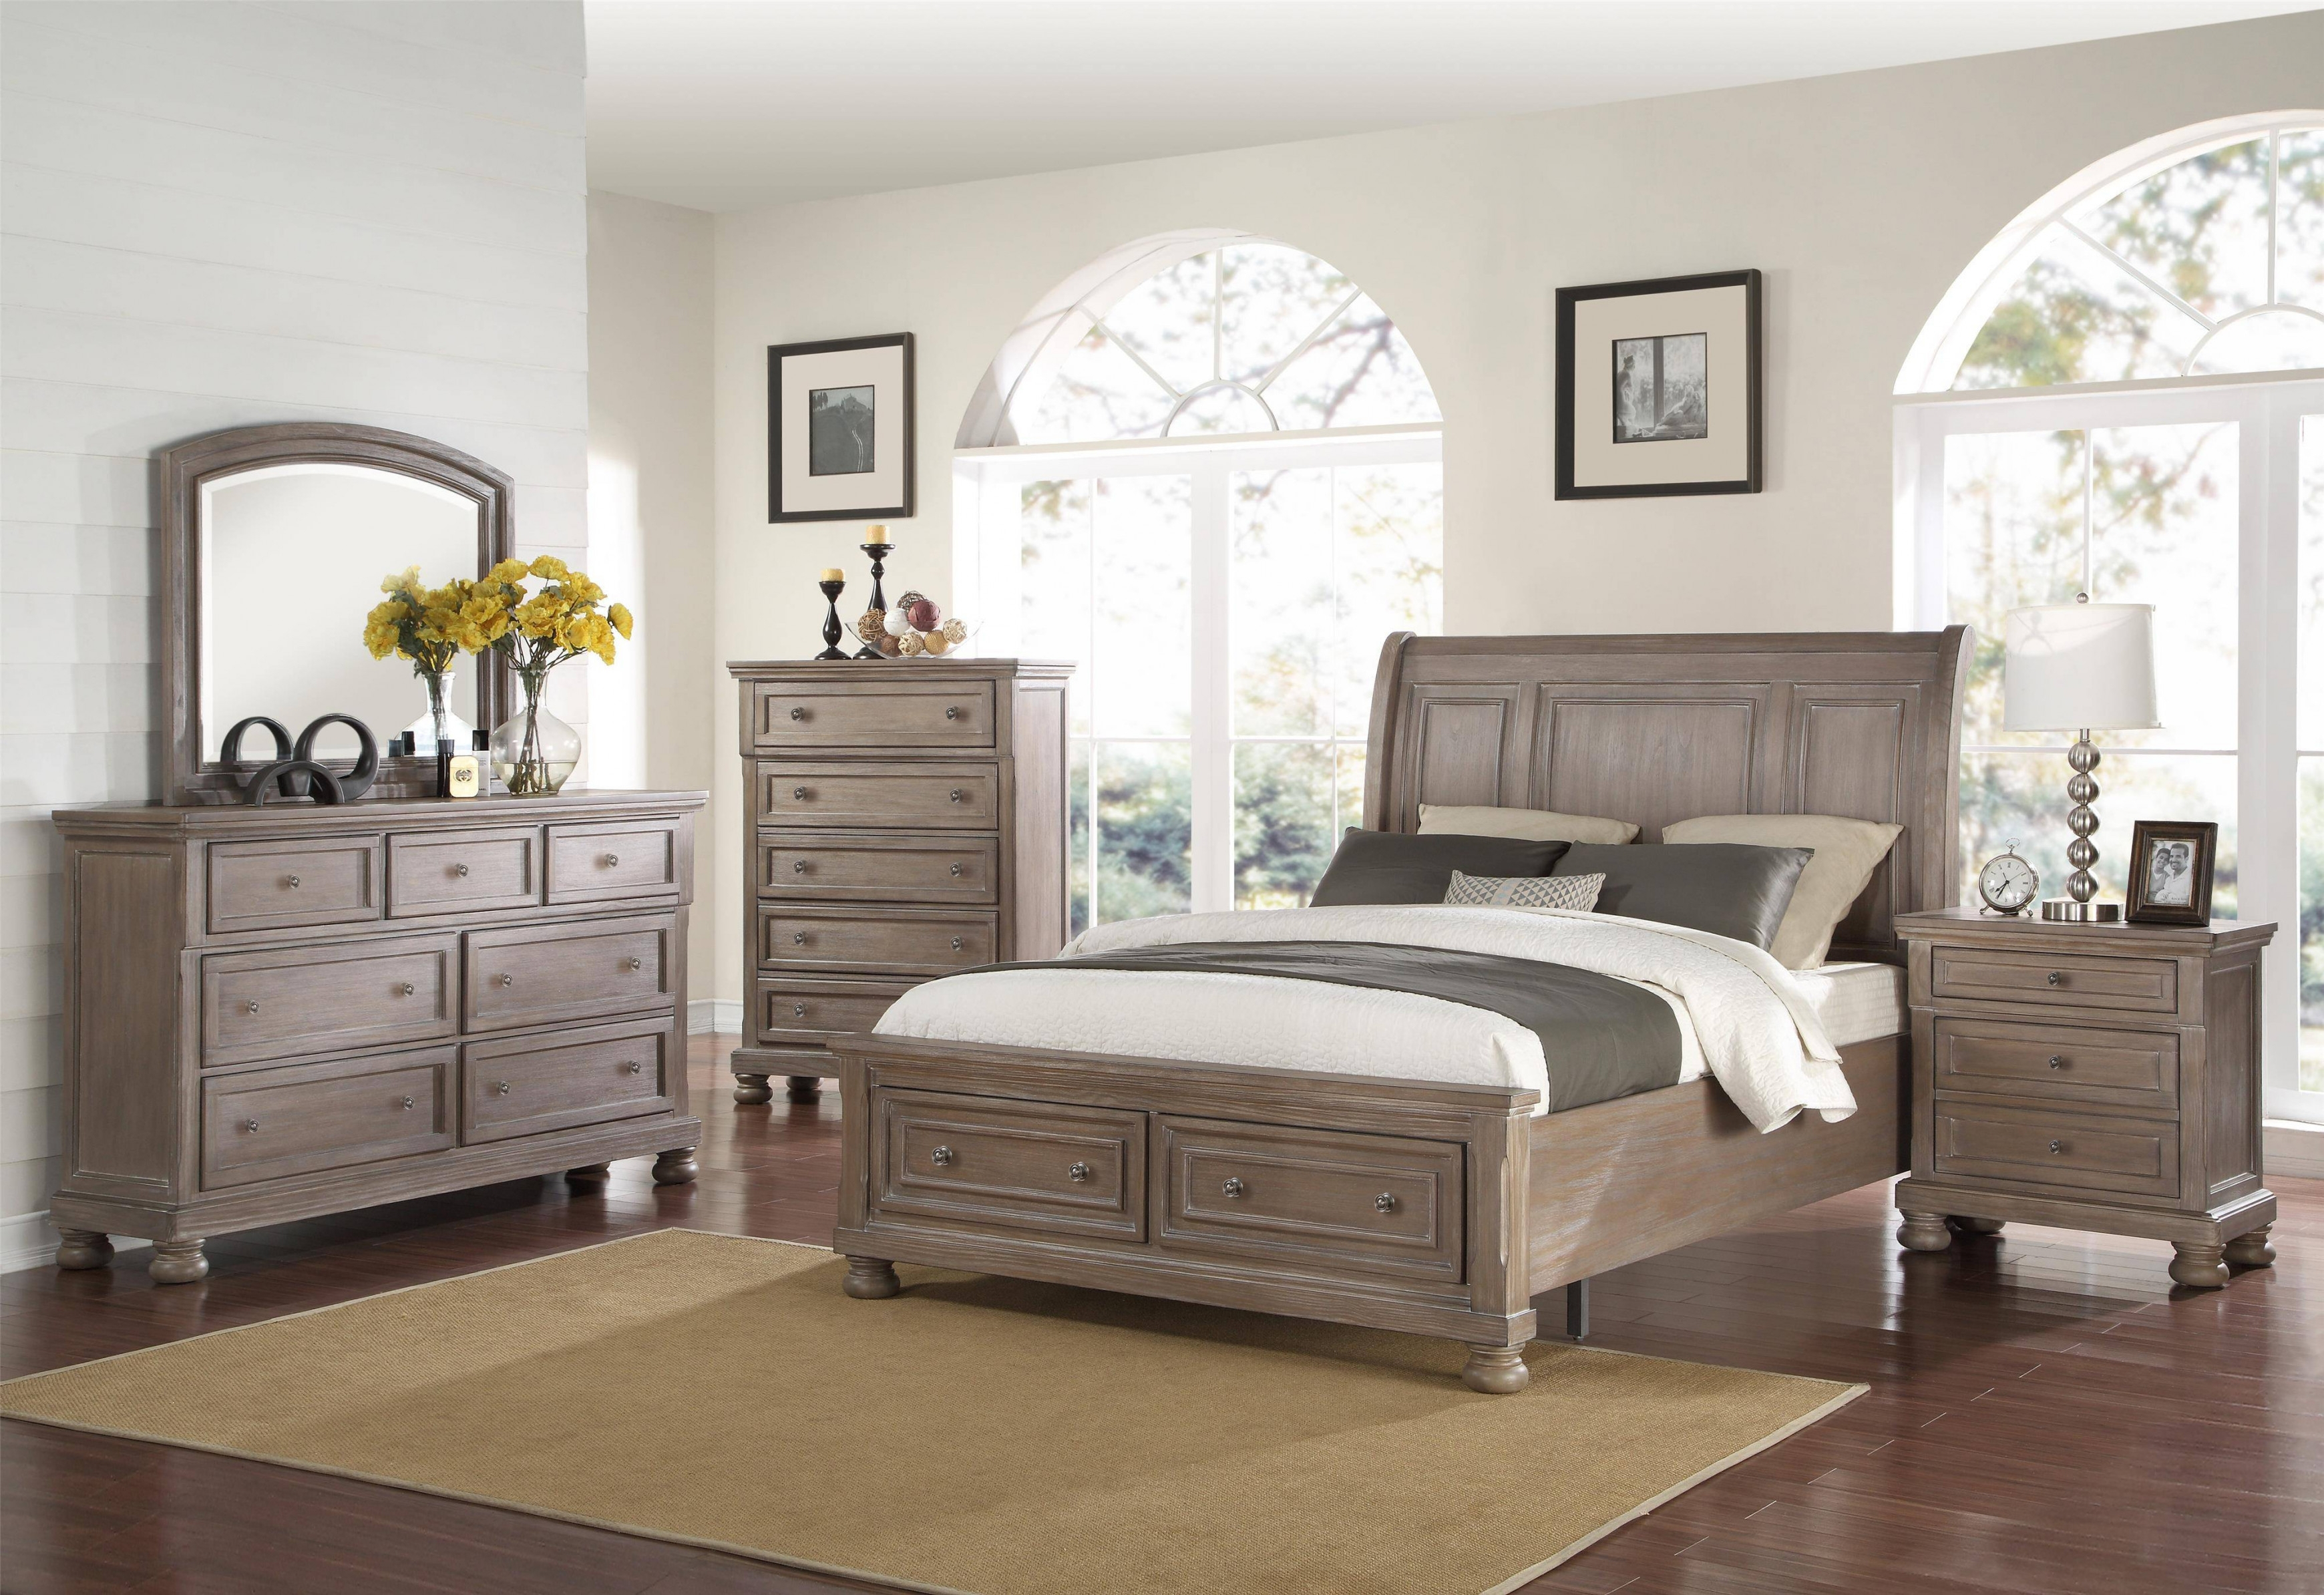 Bedroom Sets Raymour And Flanigan Layjao in size 3480 X 2388